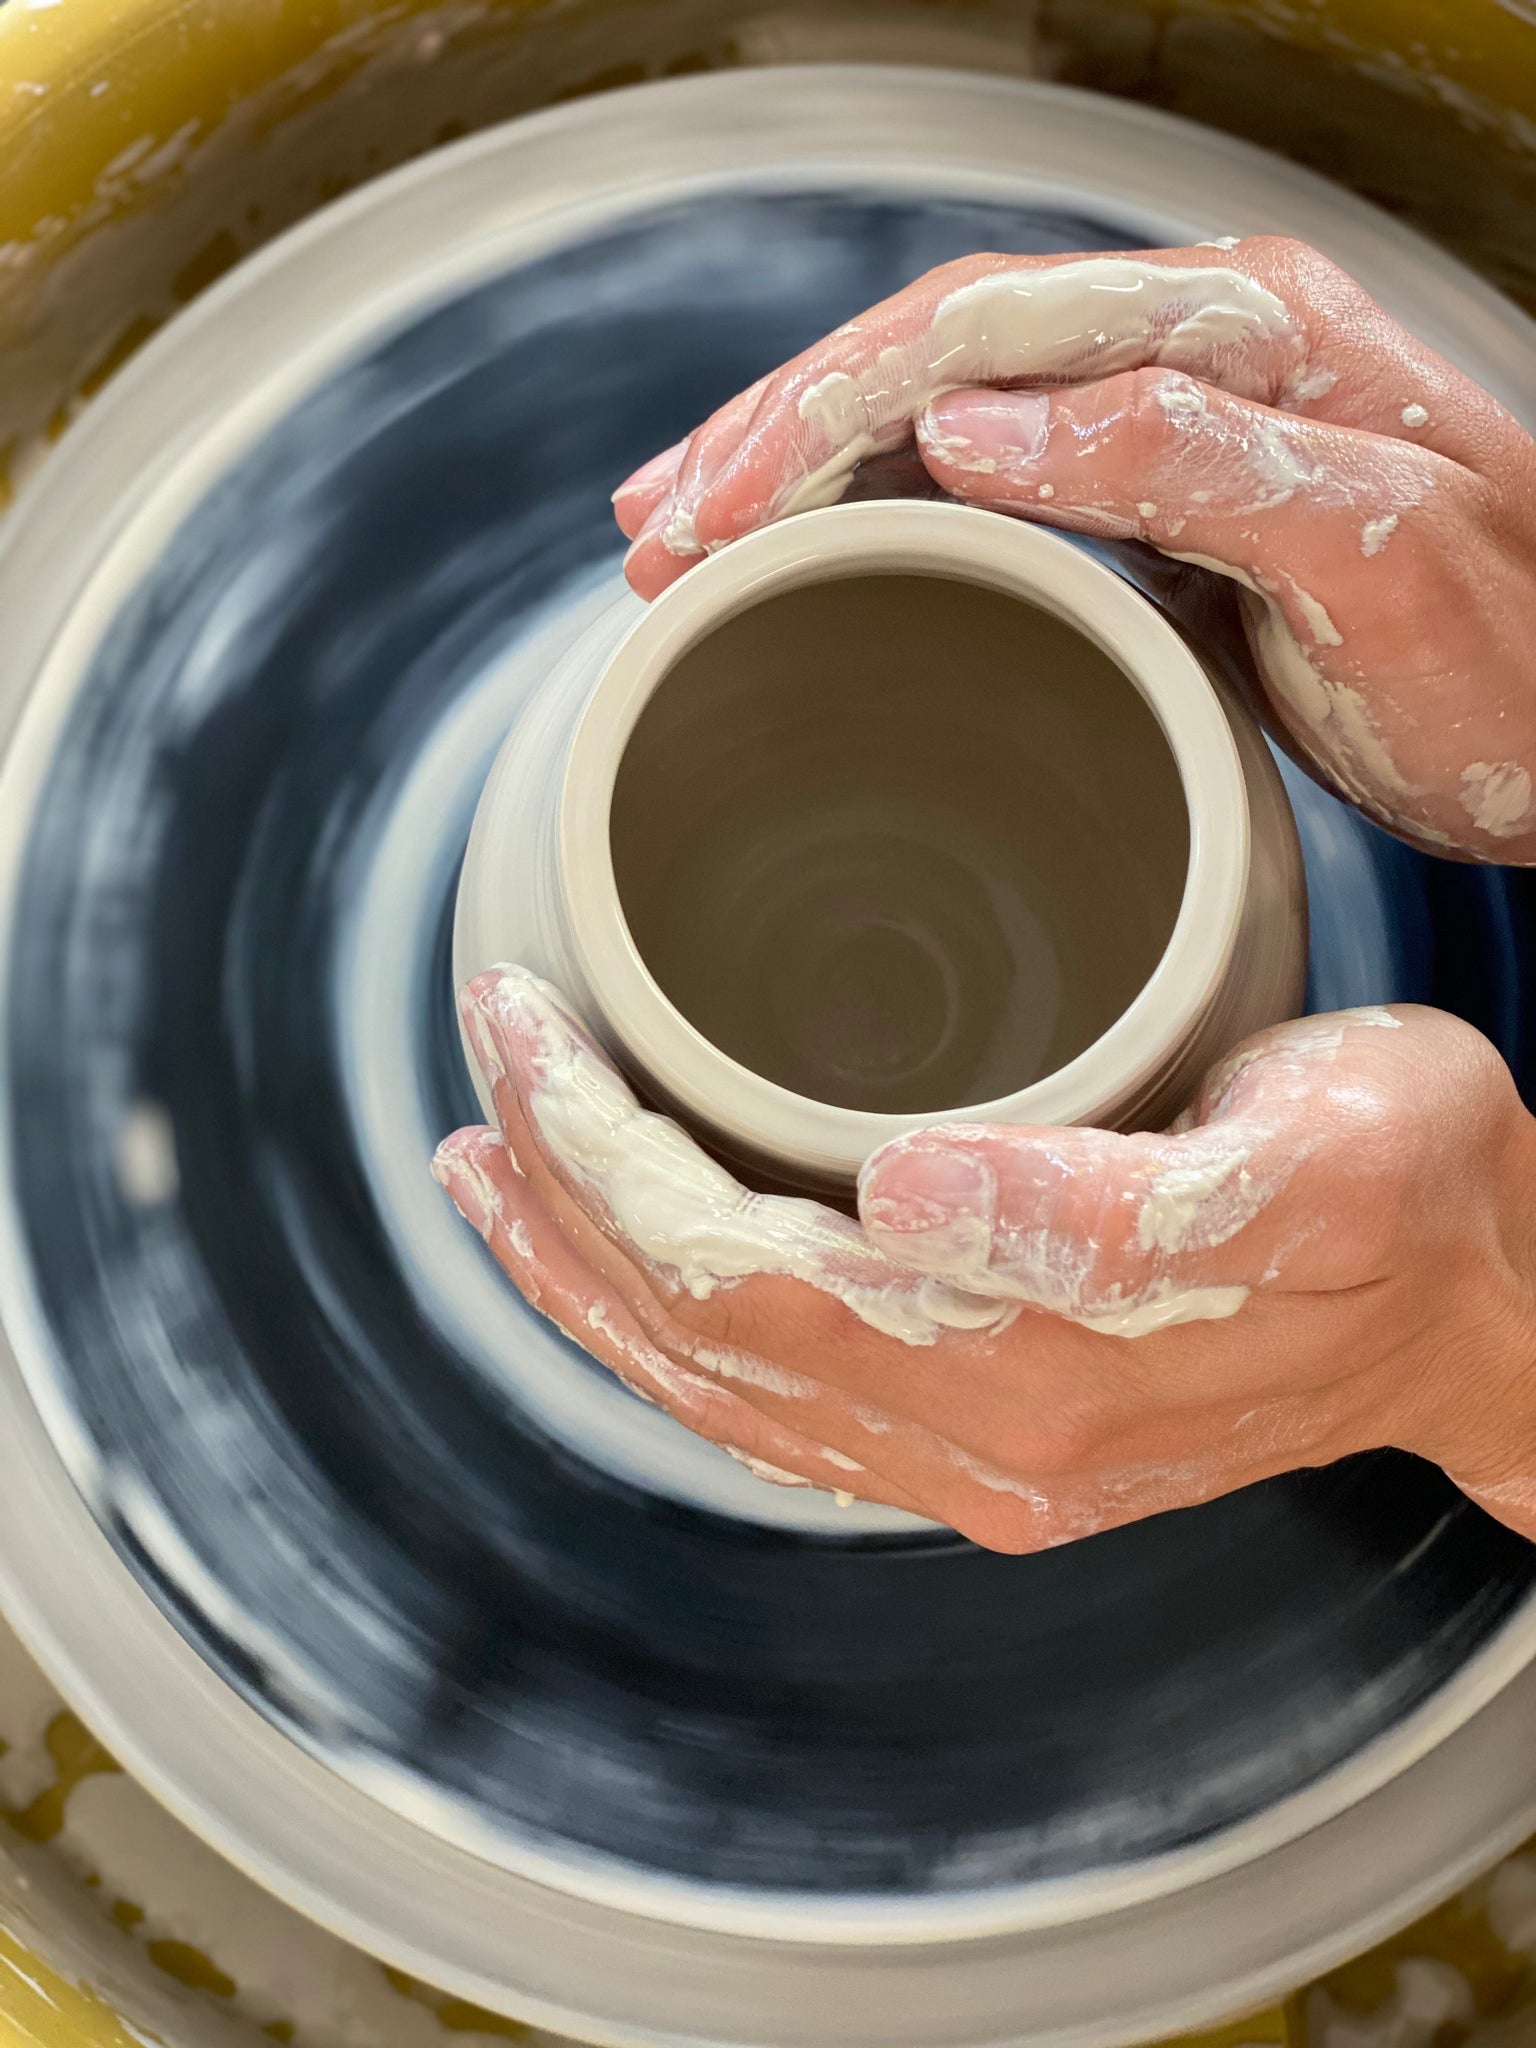 Wheel Throwing Clay Date - Sunday 9/17/23, 5 PM - 7 PM